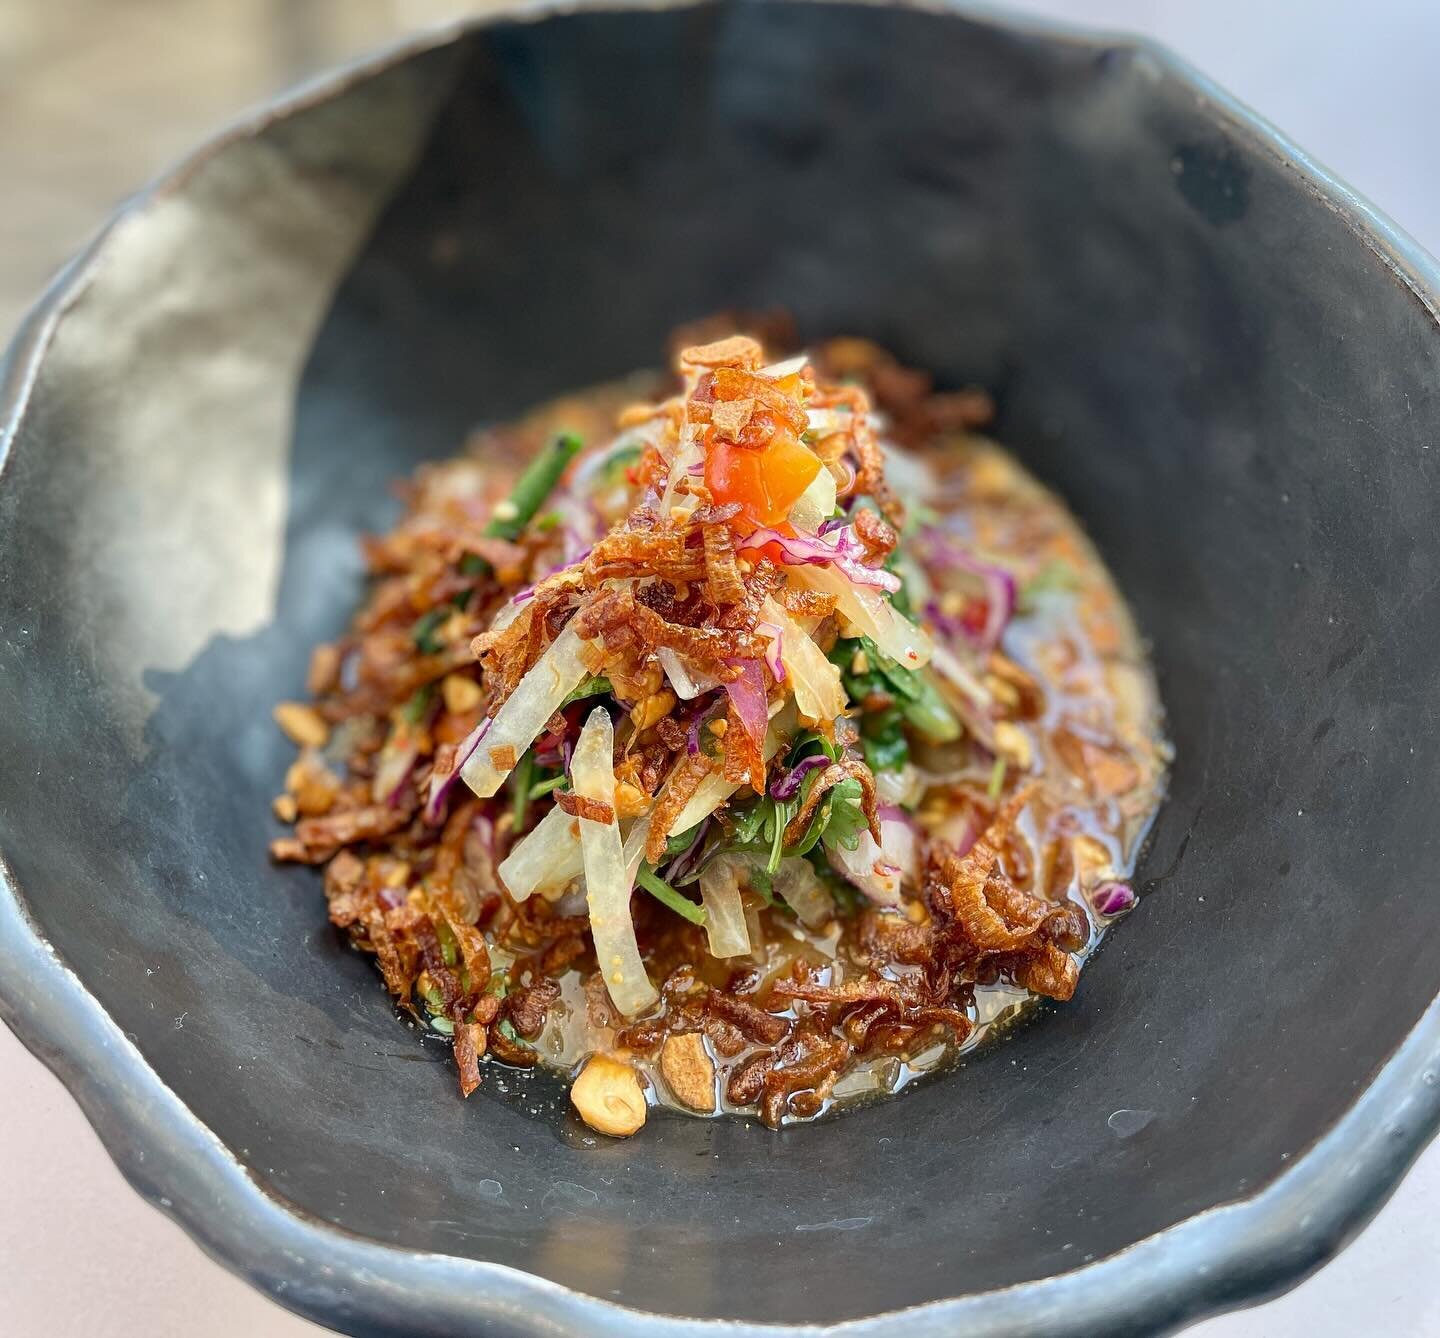 Our green papaya salad definitely knows how to hit her angles 📸 That&rsquo;s why she&rsquo;ll always be a classic. Raise your hand if you&rsquo;re a green papaya girlie! 

Green Papaya Salad | toasted peanut, Thai herbs, chiles, crispy shallot, cher